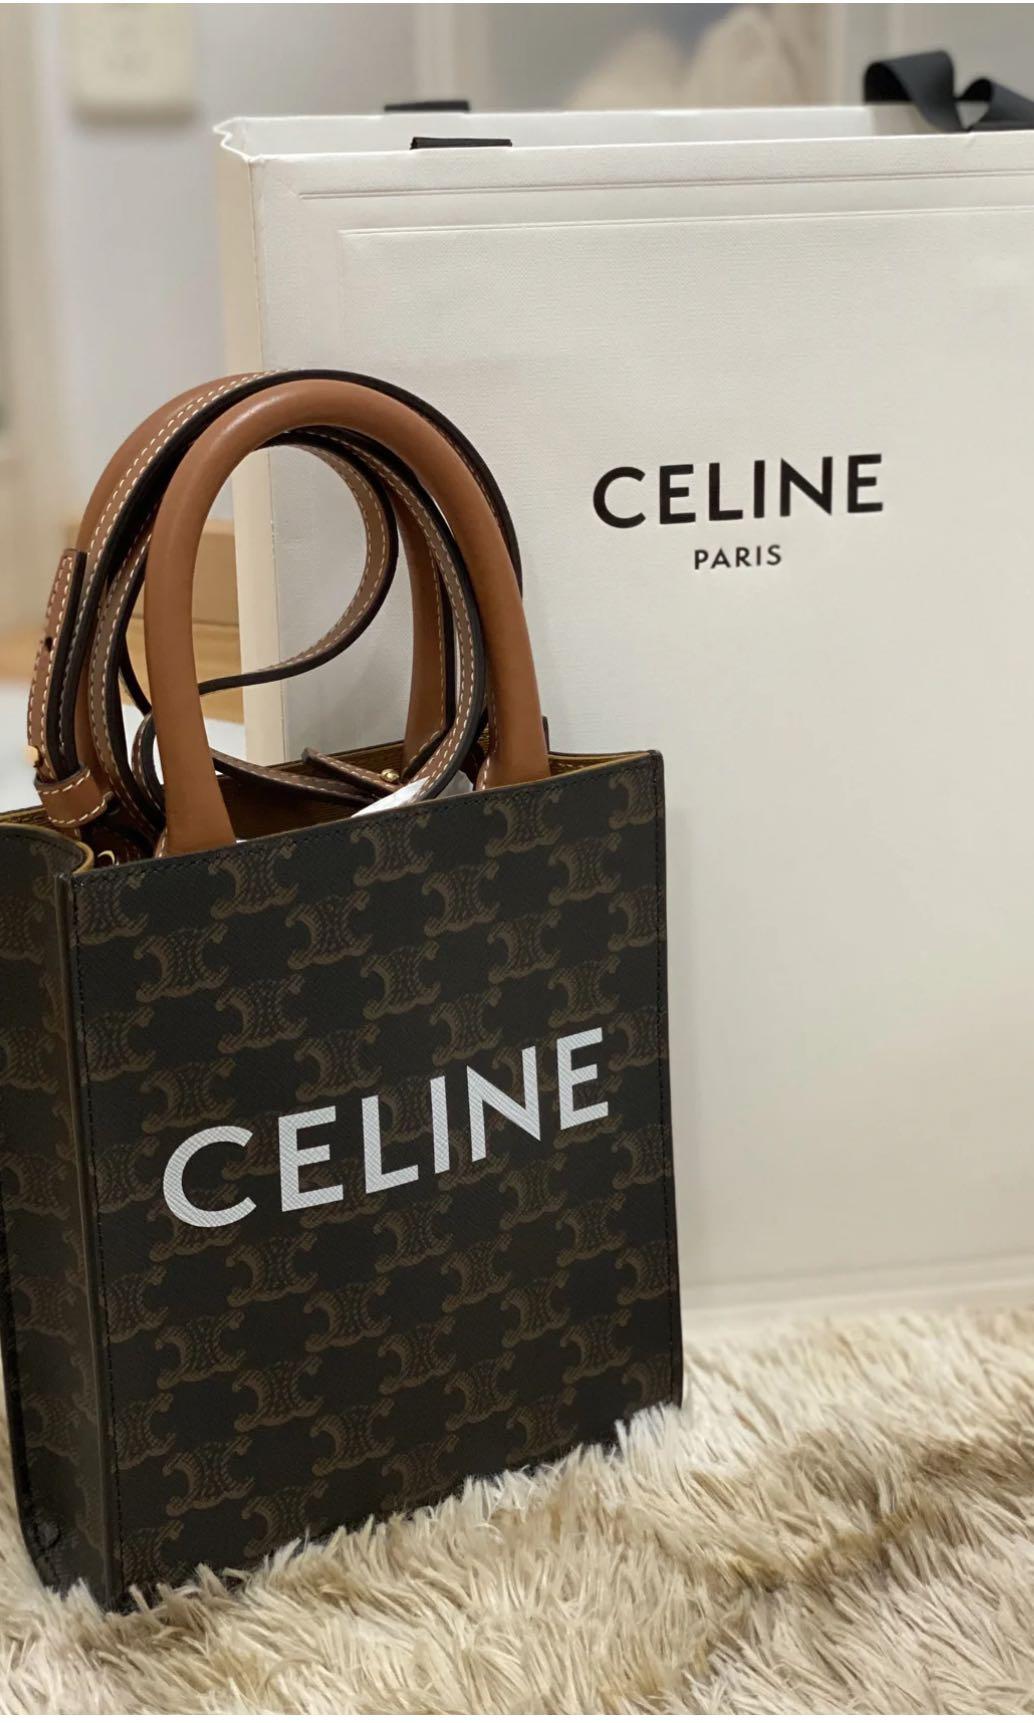 MINI VERTICAL CABAS IN TRIOMPHE CANVAS AND CALFSKIN WITH CELINE PRINT - TAN